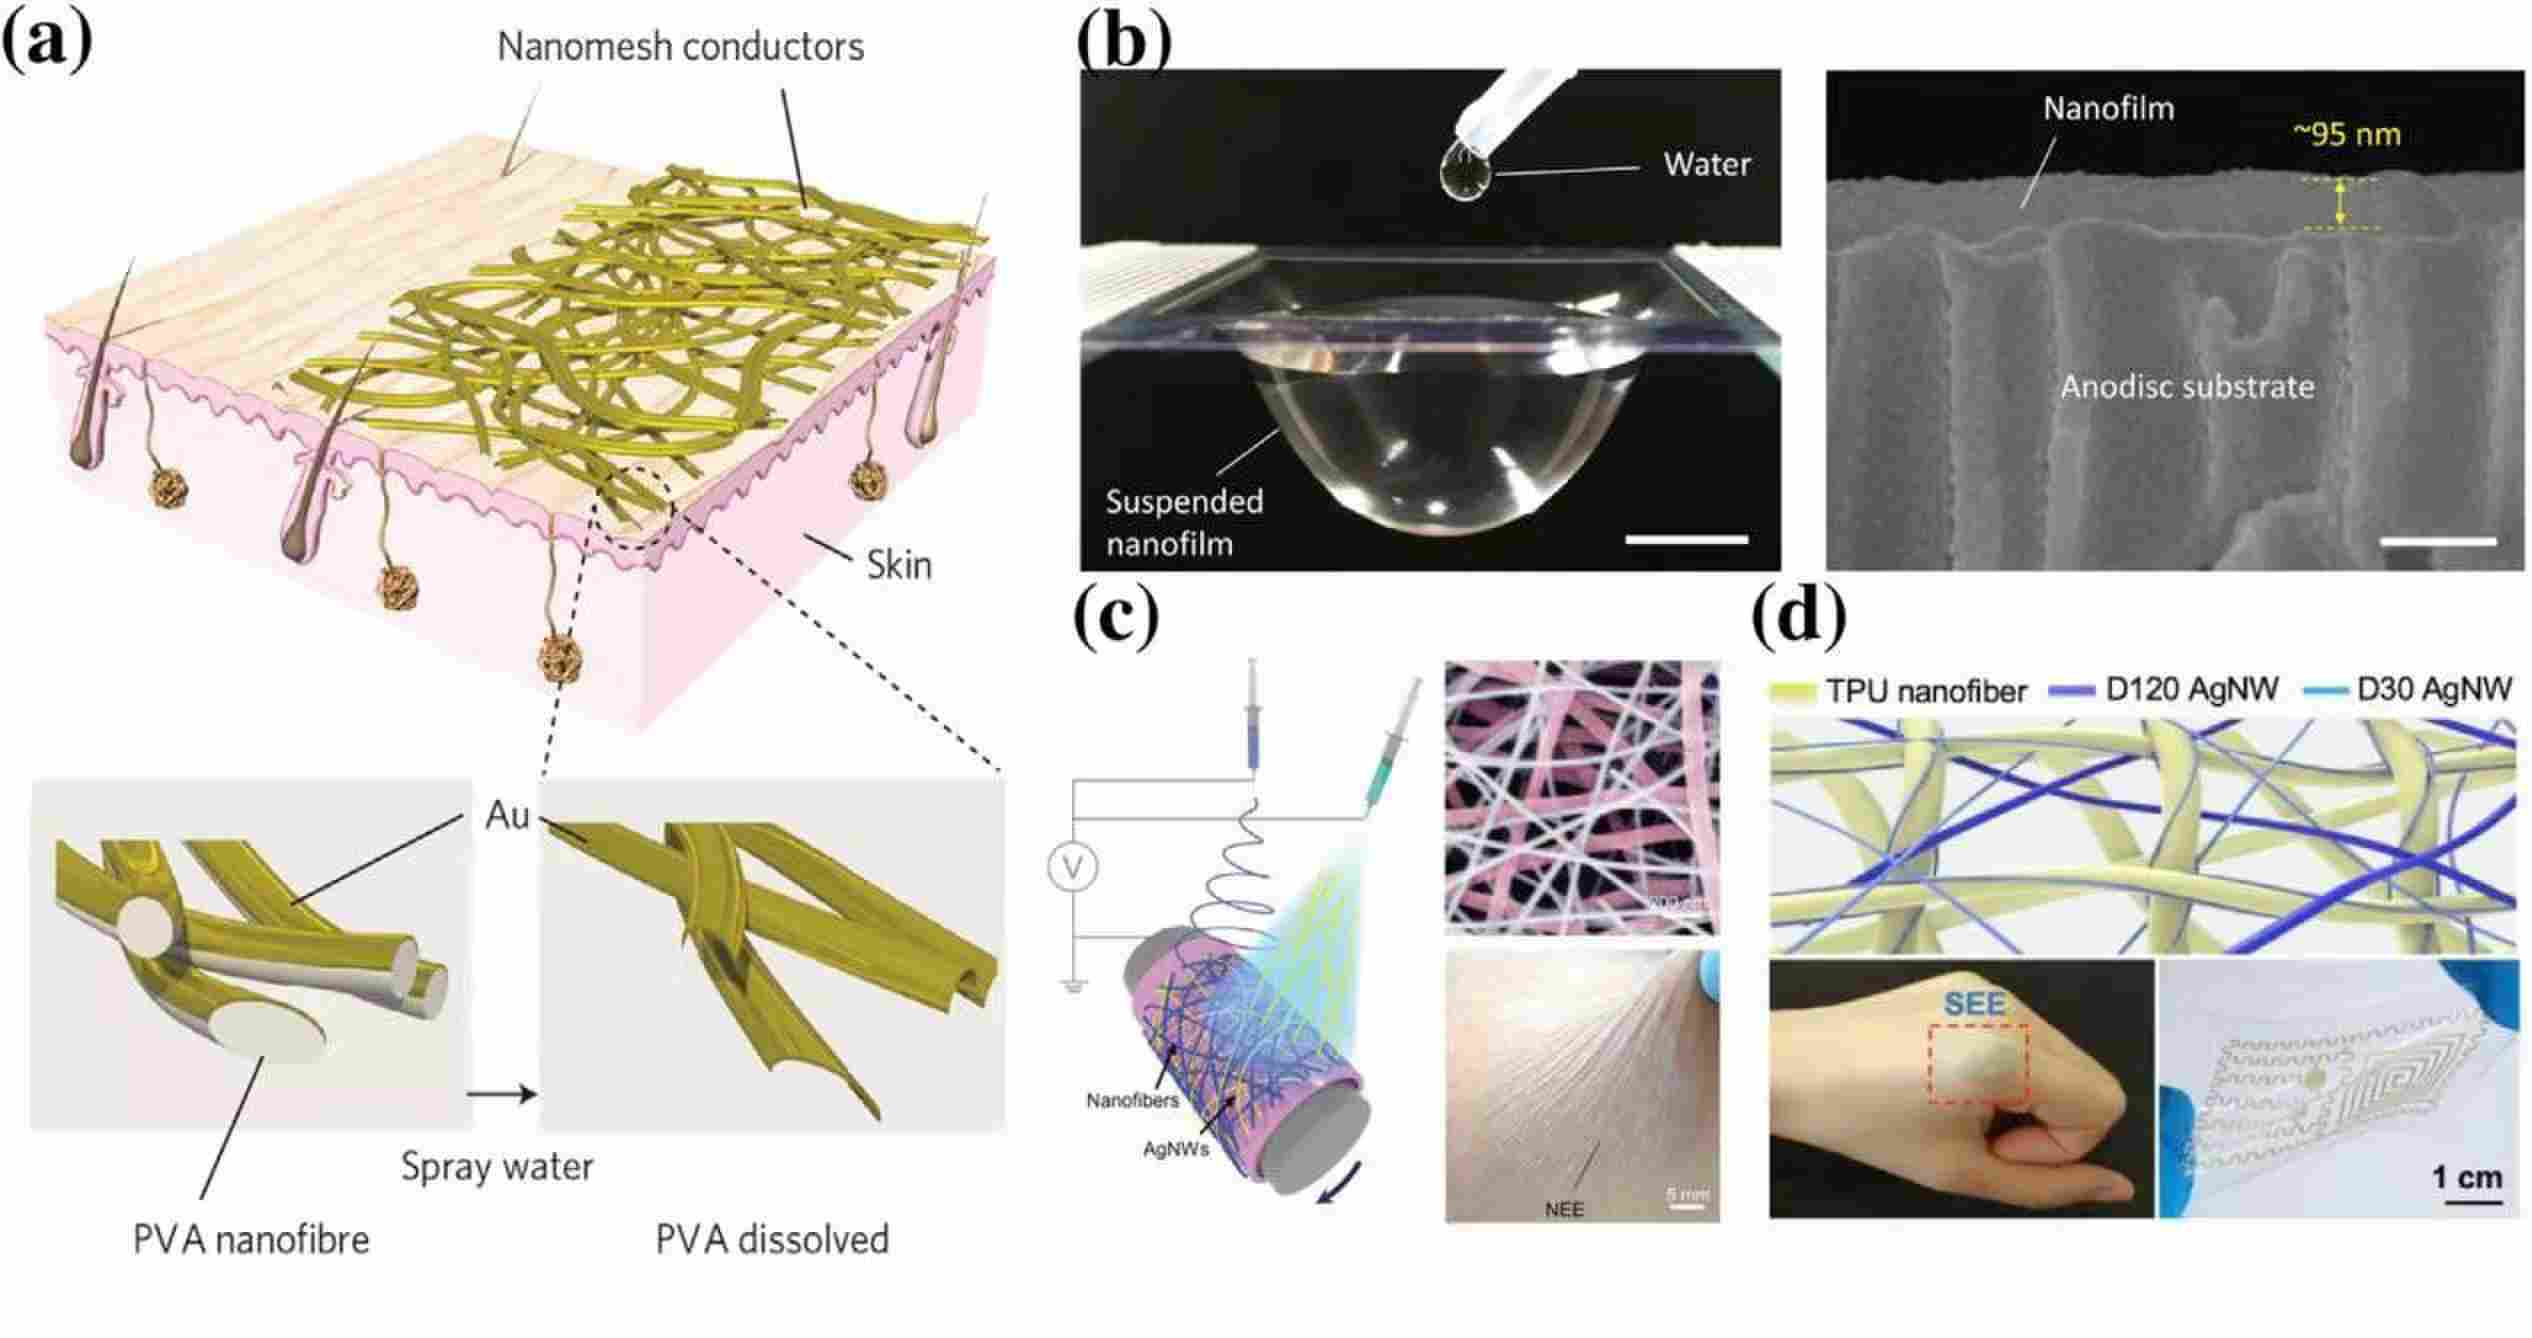 (a) Schematic diagram of conductive Nanonets on skin manufactured by evaporating Au onto electrospun PVA nanofibers,_new_new.jpg